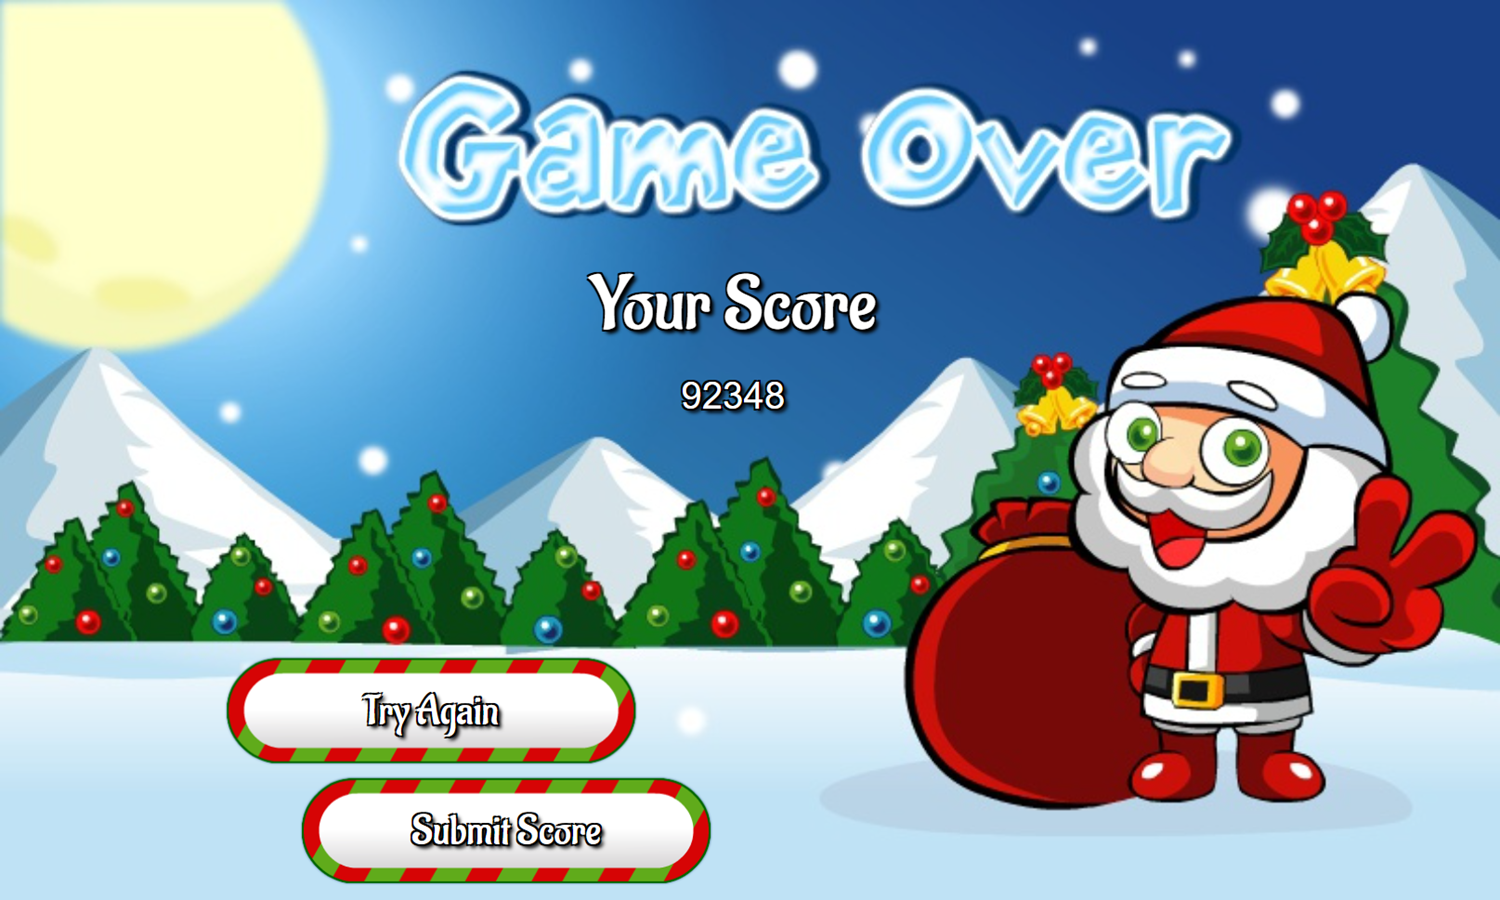 Christmas Connect Game Your Score Screenshot.